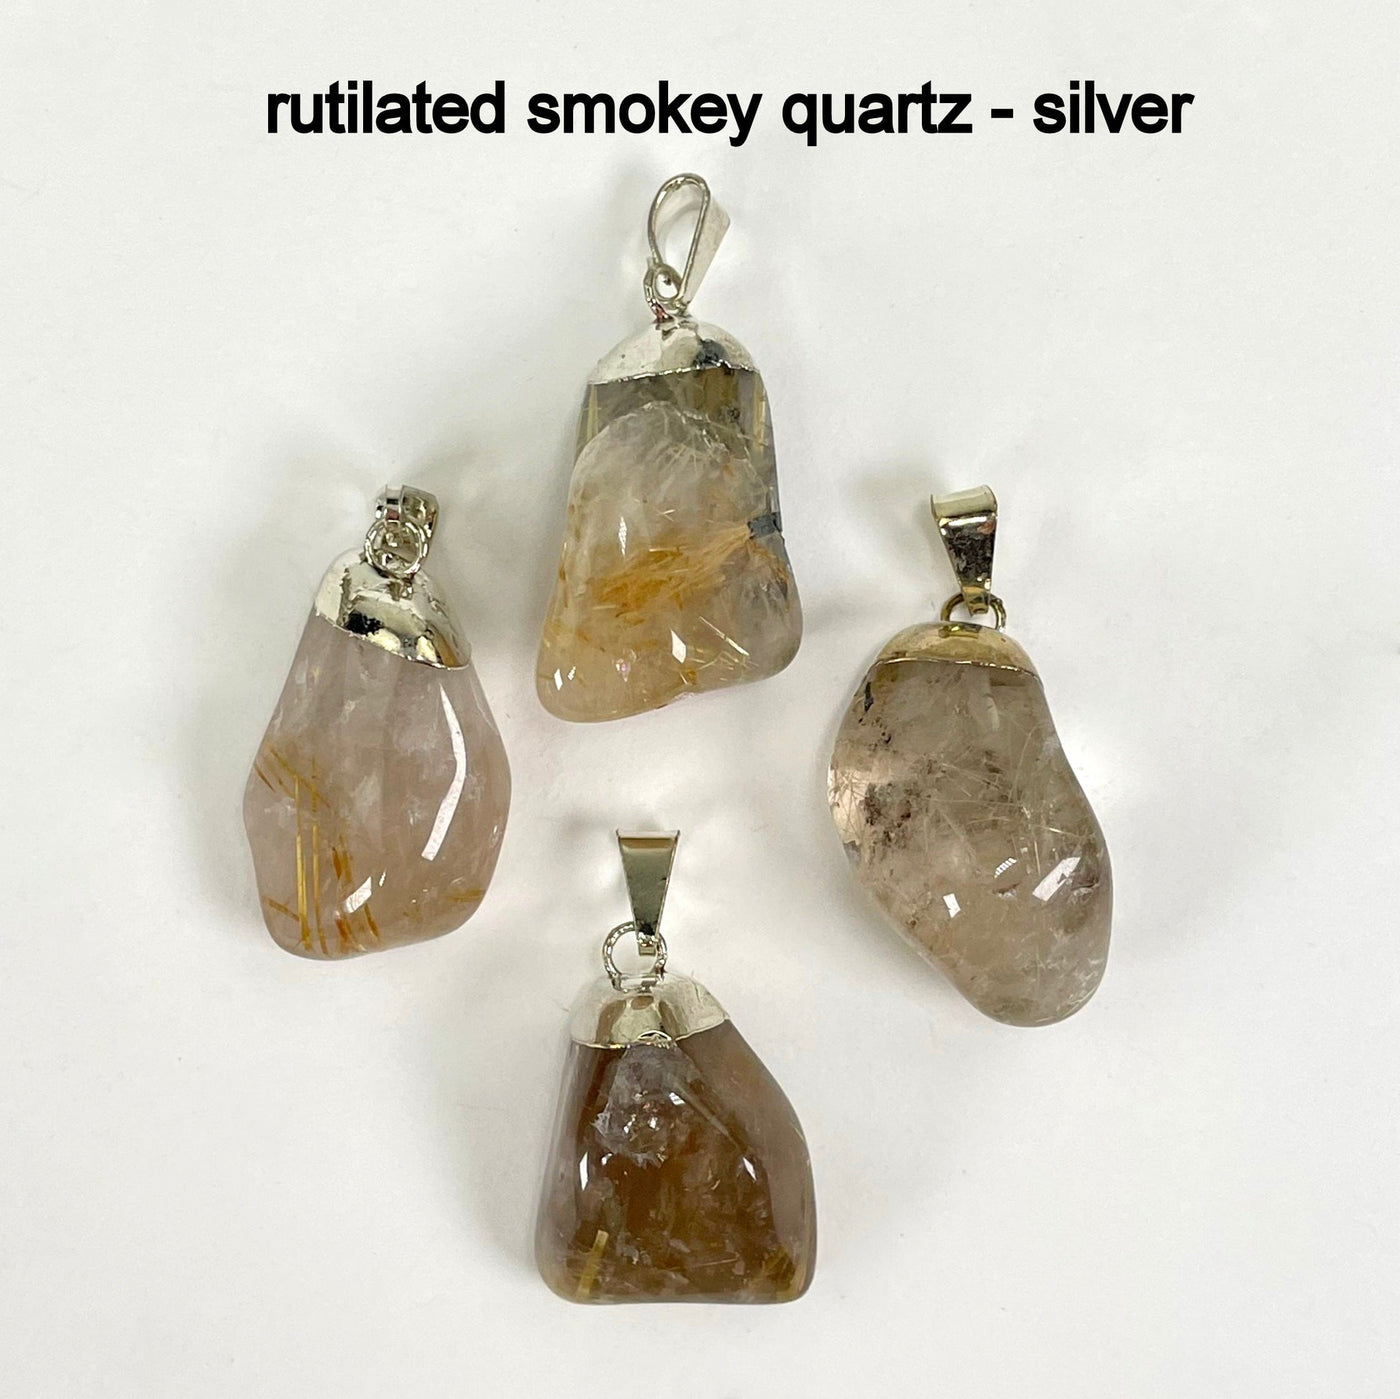 close up of four tumbled rutilated smokey quartz pendants in gold for possible stone variations and details